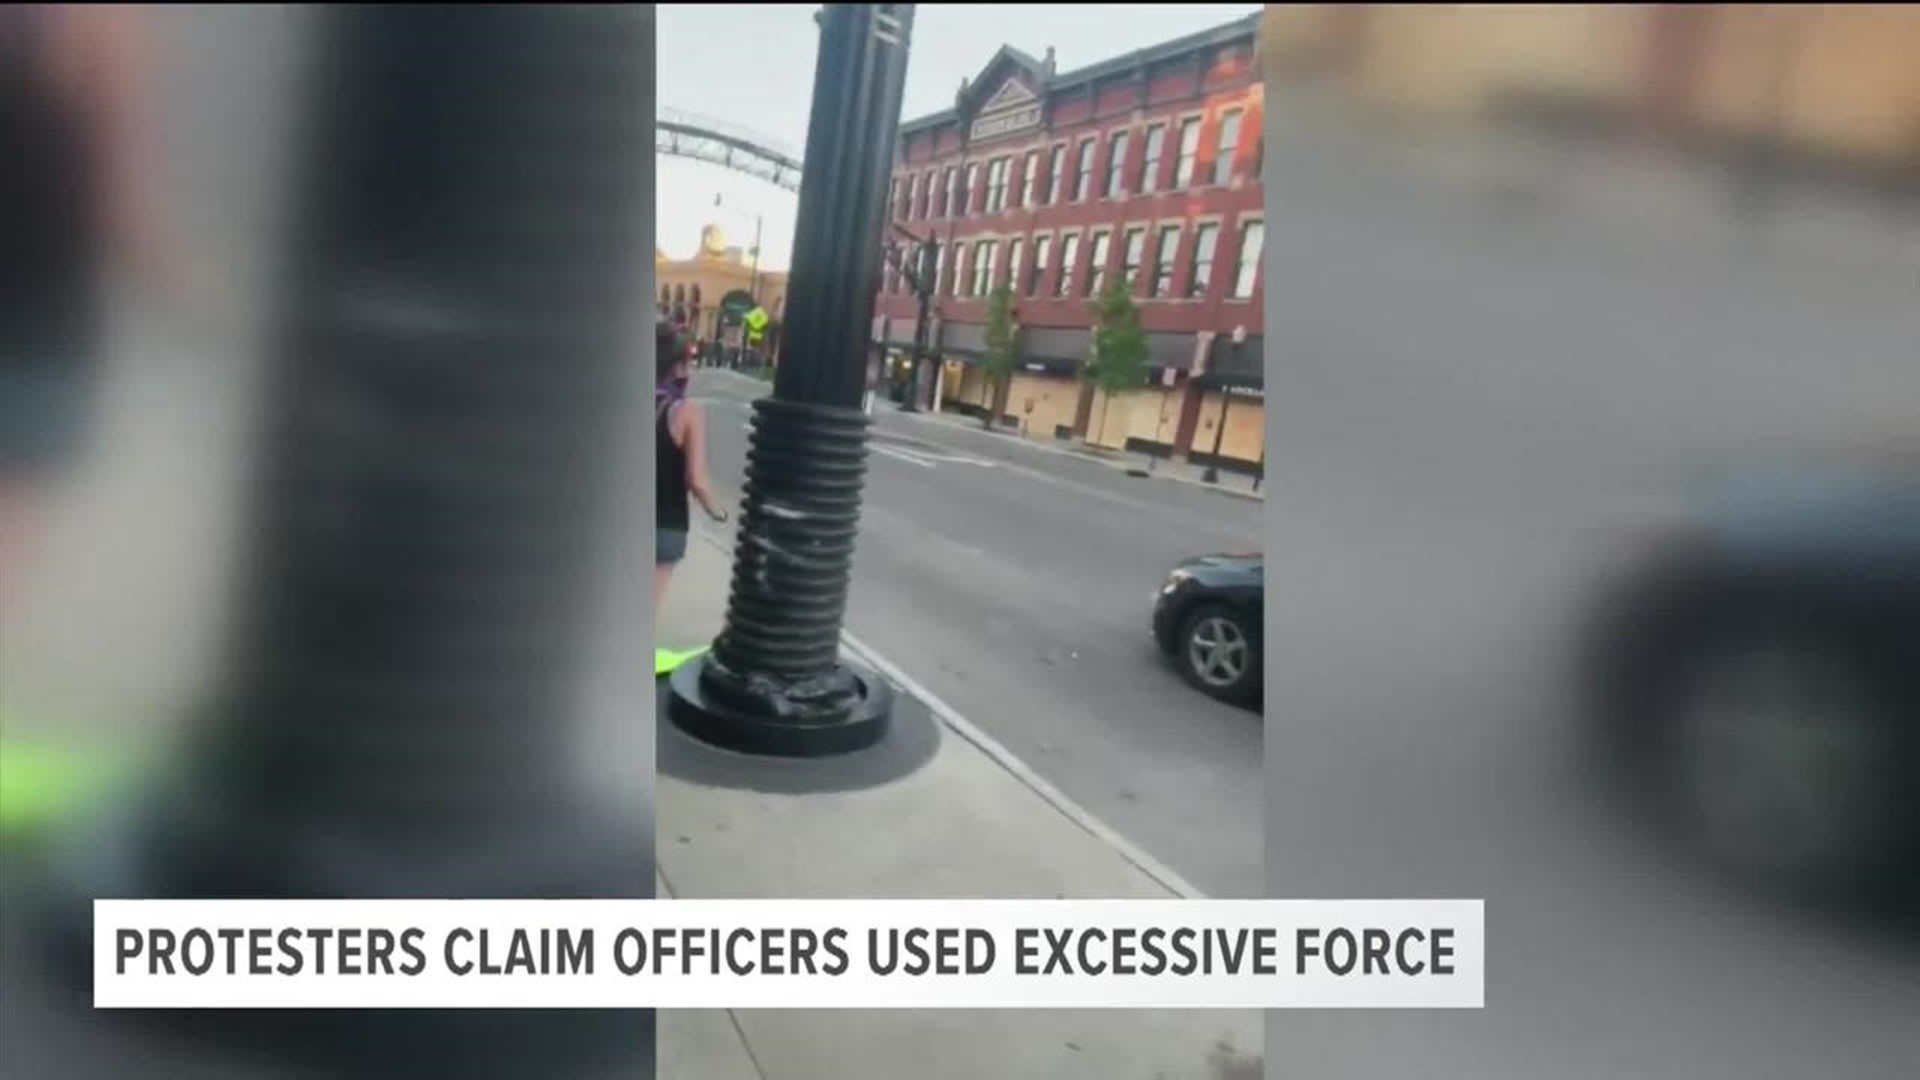 Video shows what appears to be officers using excessive force